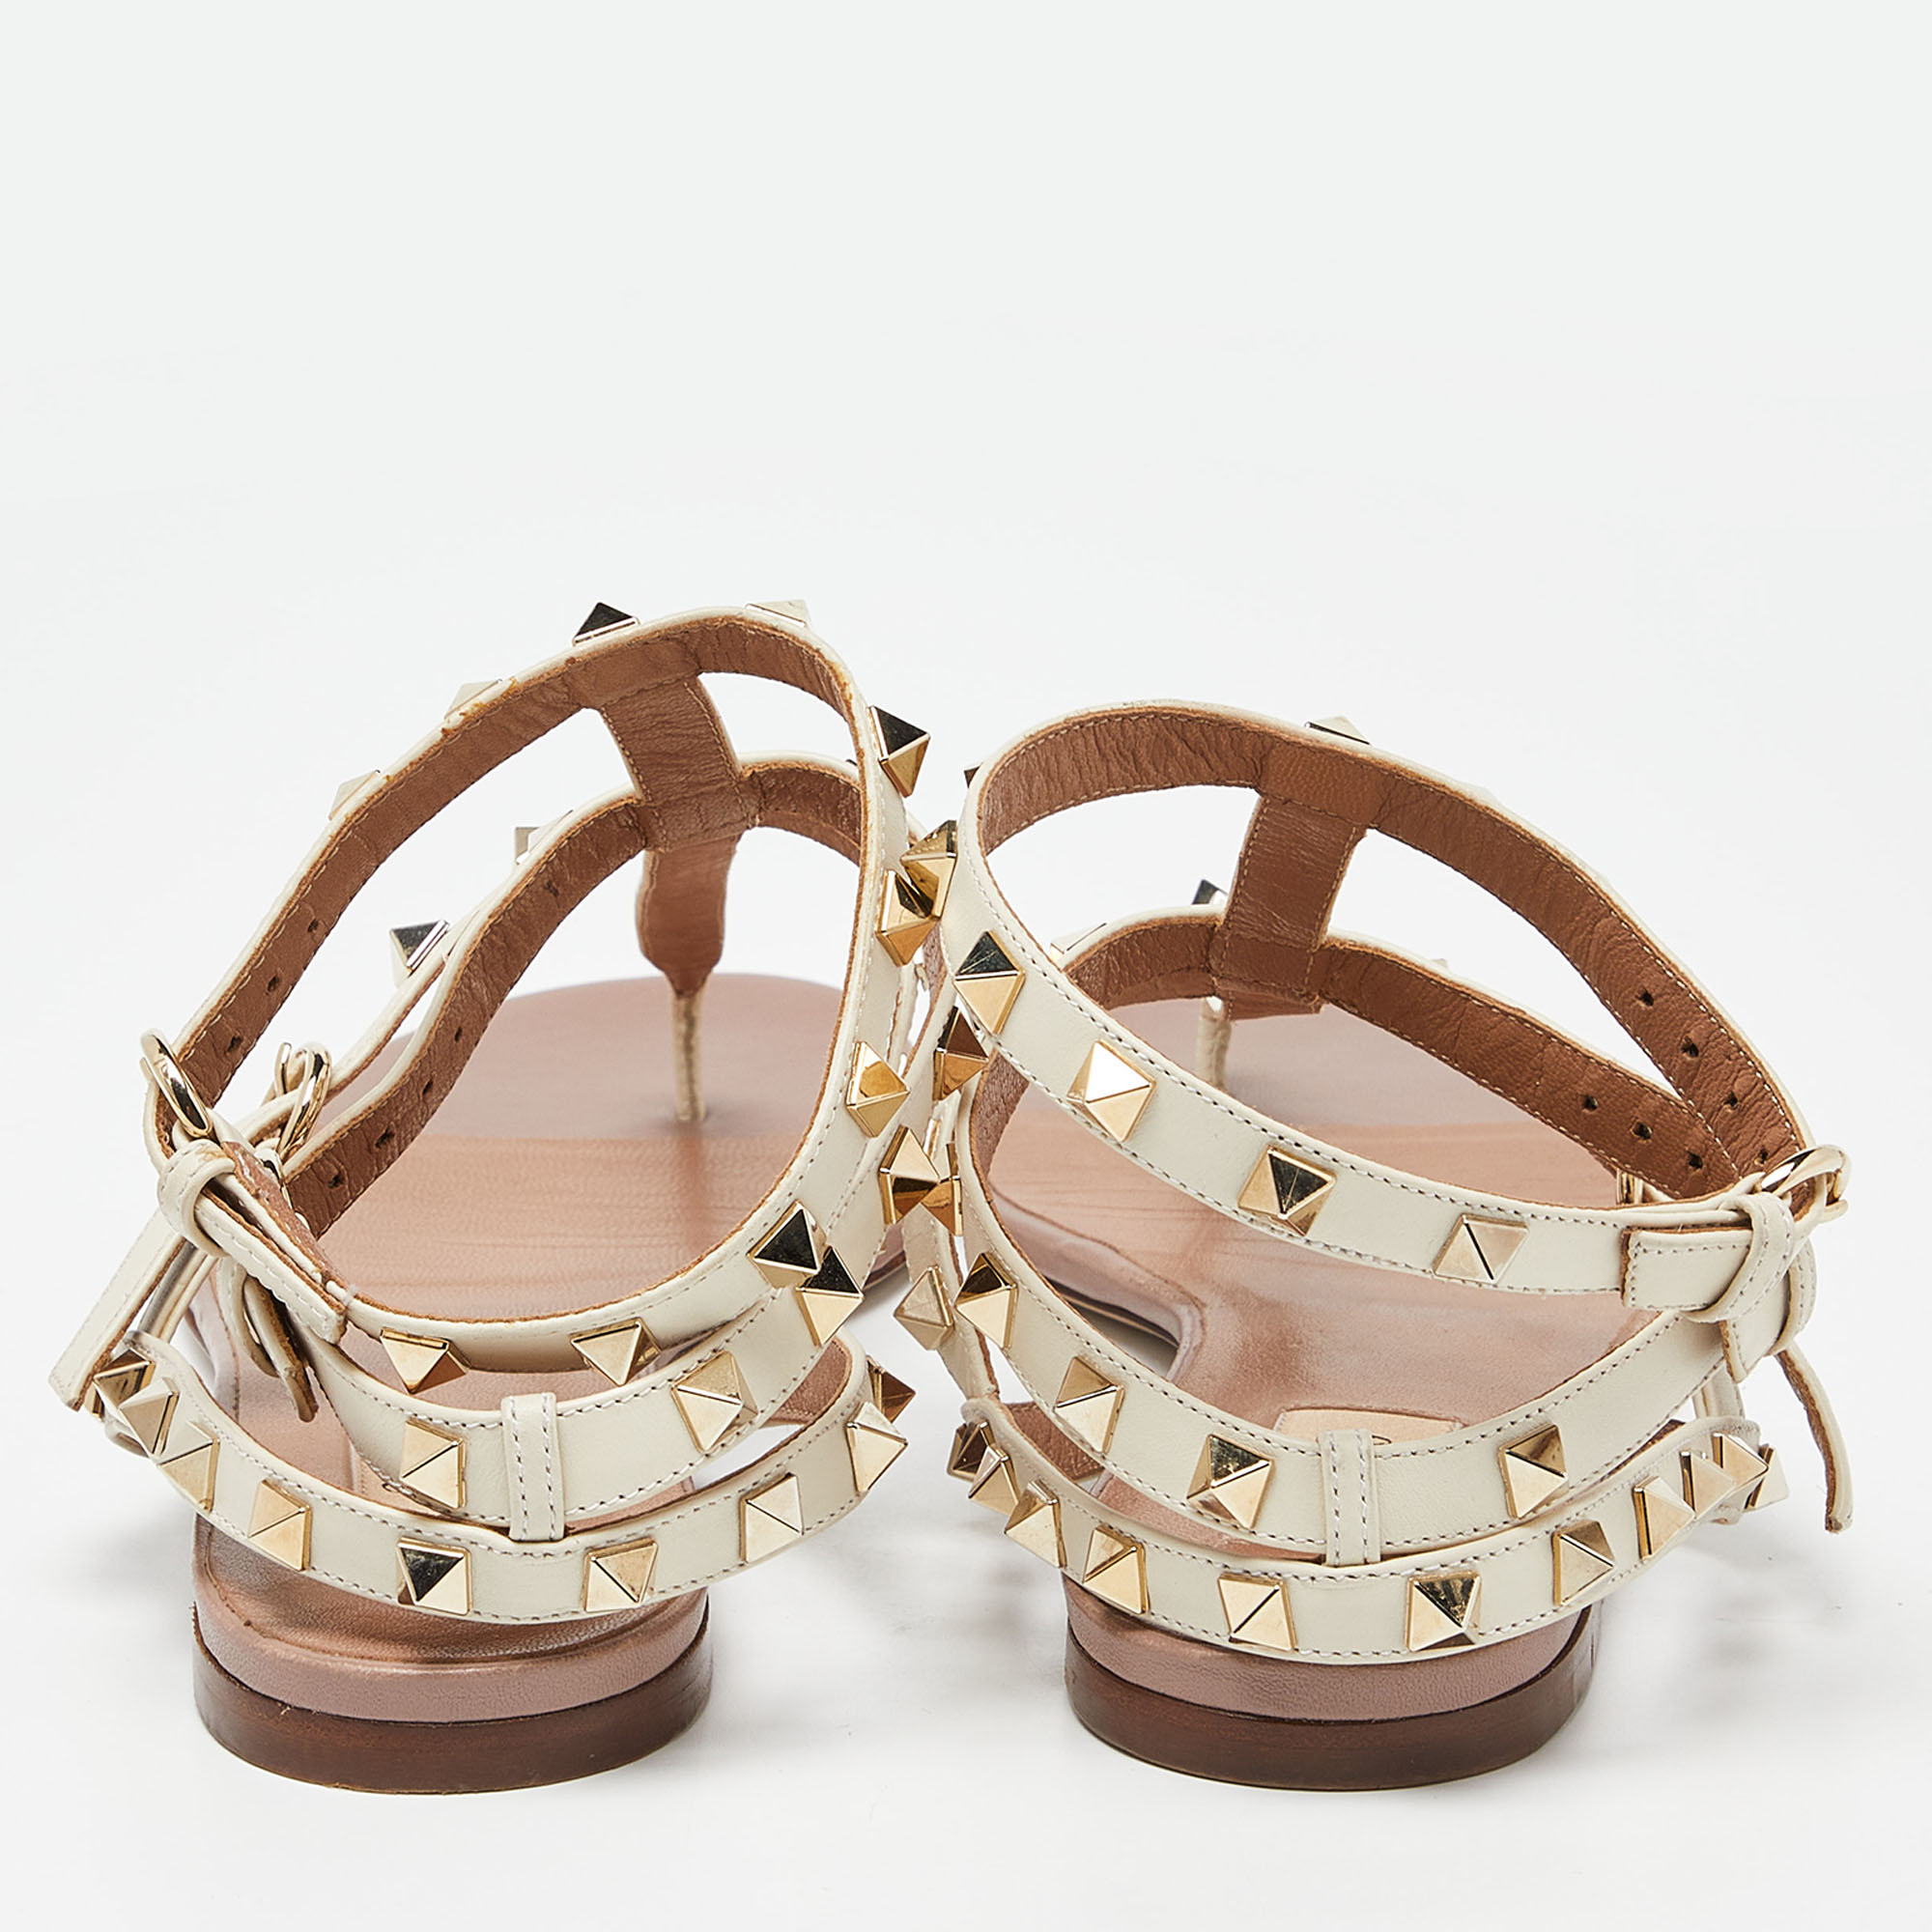 Valentino Cream Leather Rockstud Ankle Strap Flat Sandals Size 41